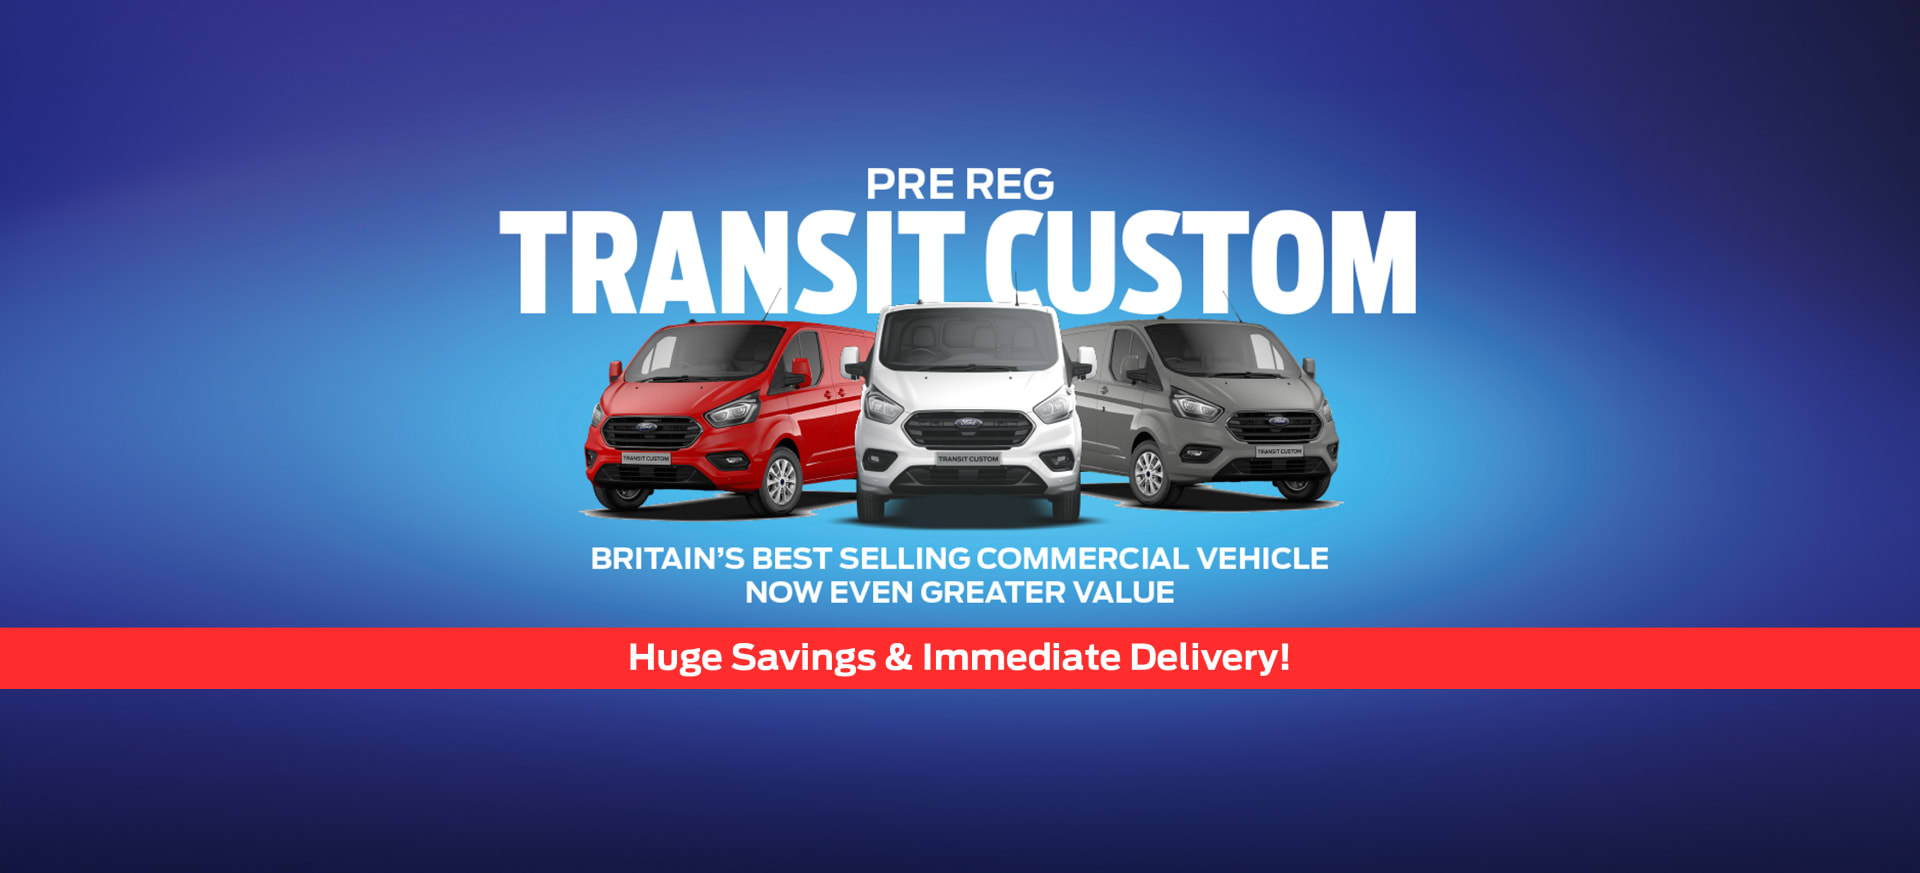 Premium Used Transit Custom Stock List - Immediate Delivery Available